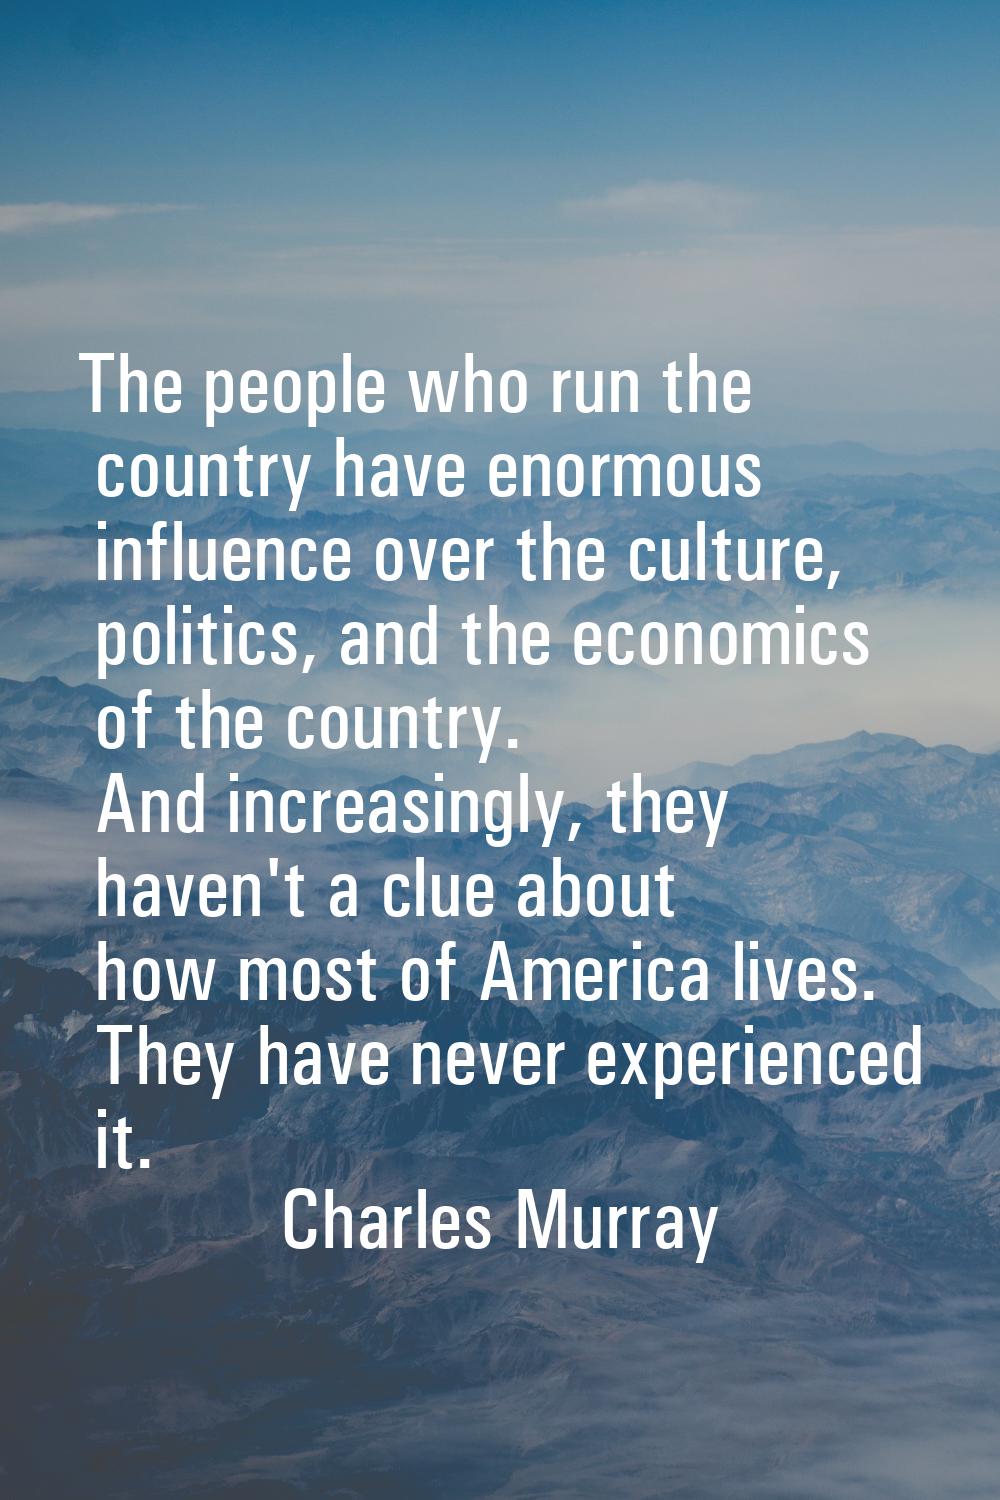 The people who run the country have enormous influence over the culture, politics, and the economic